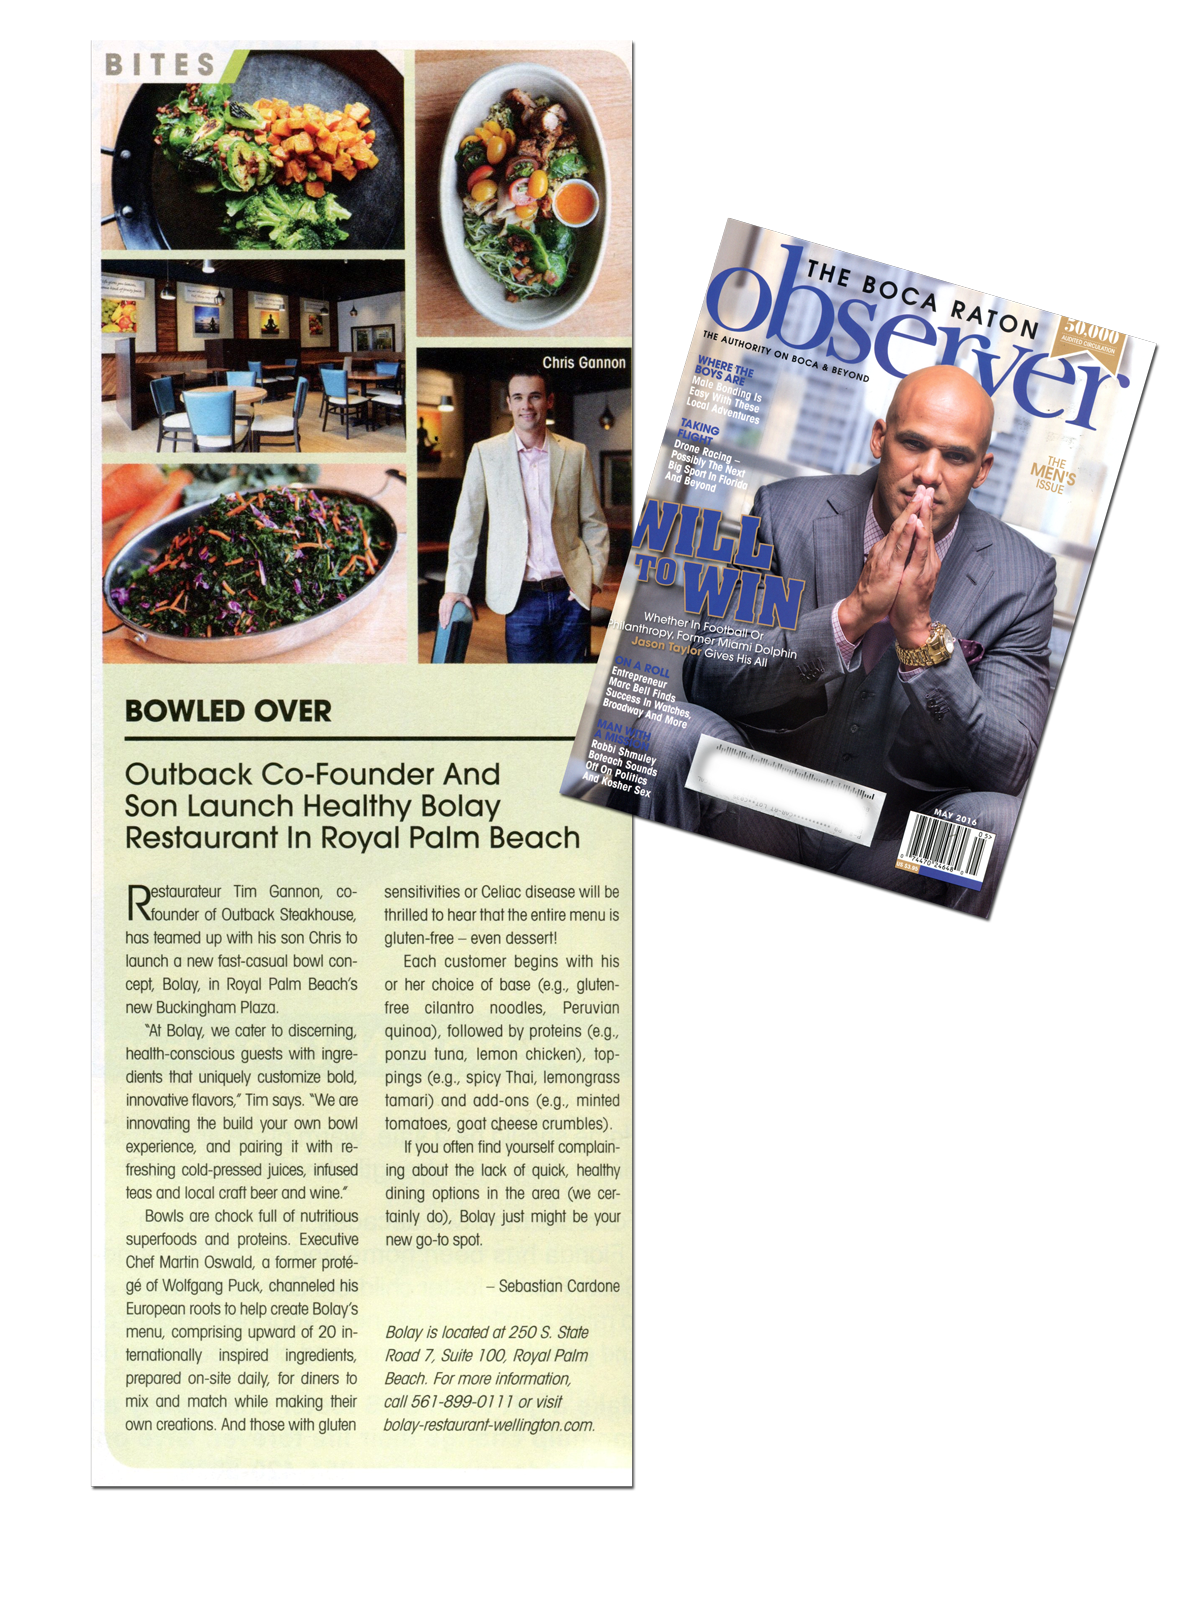 Outback Co-Founder and Son Launch Healthy Bolay Restaurant in Royal Palm Beach by the Boca Raton Observer, May 2016.